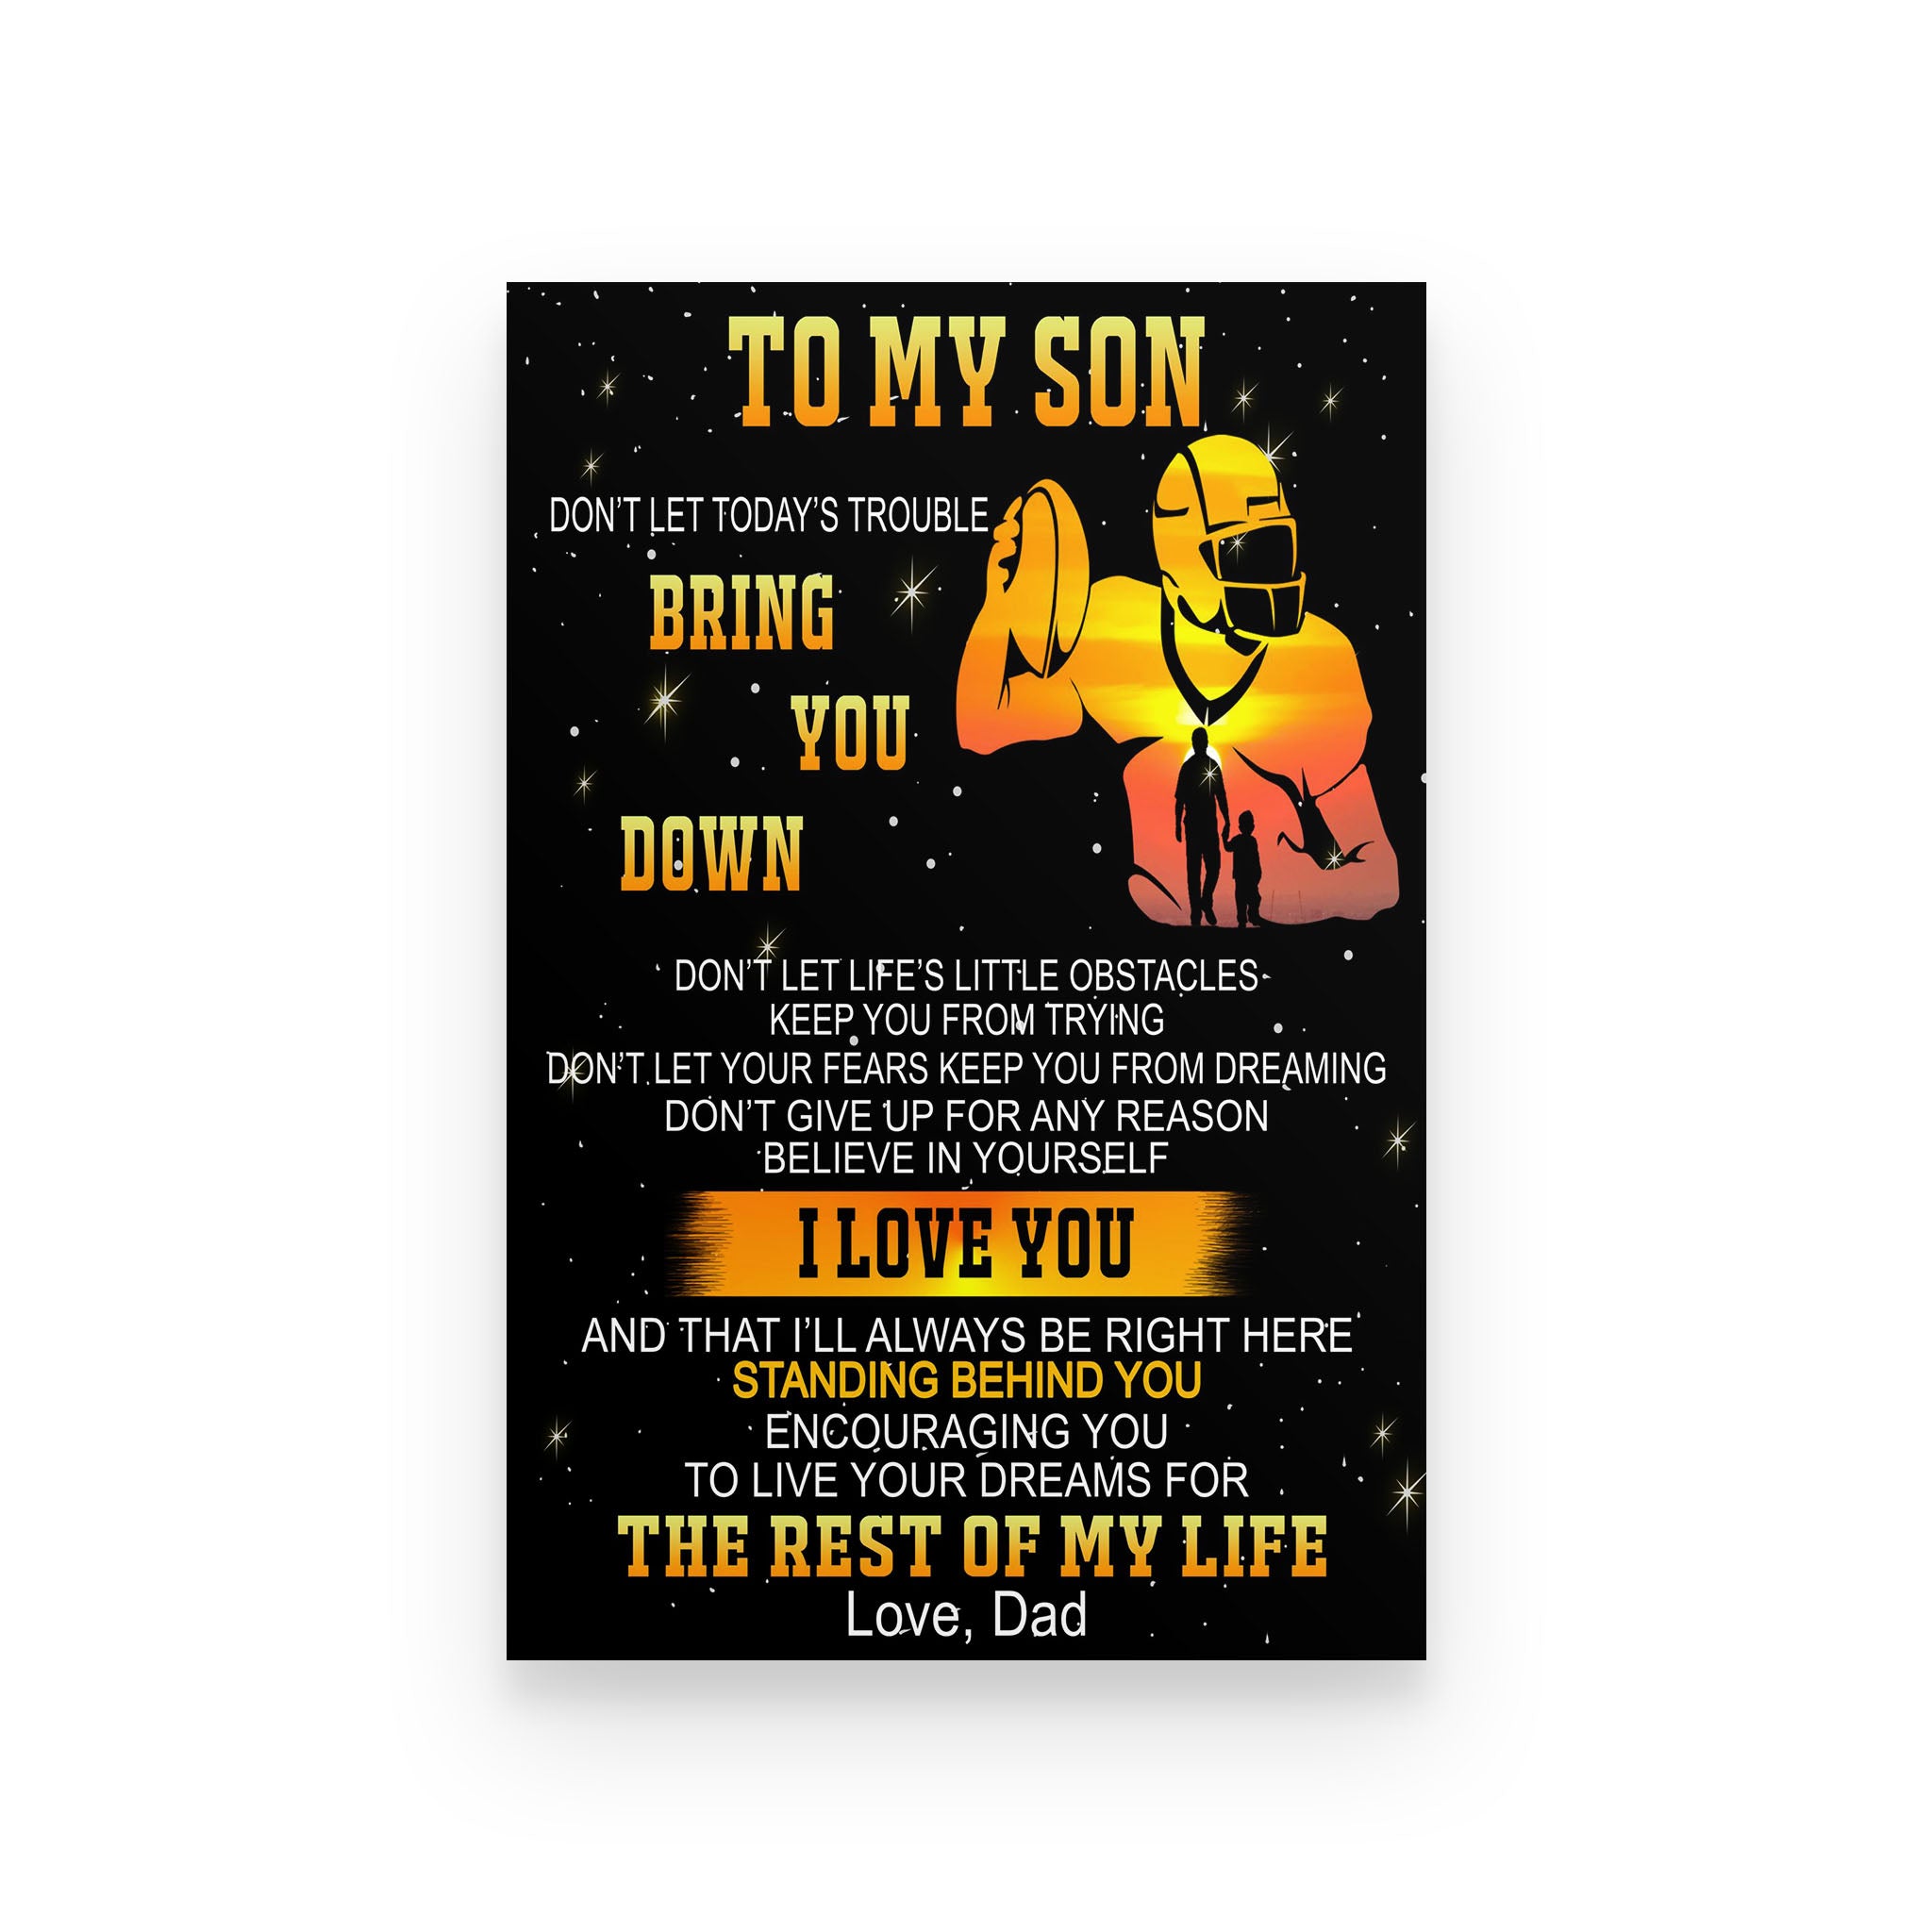 American football poster dad to son don’t let today’s trouble